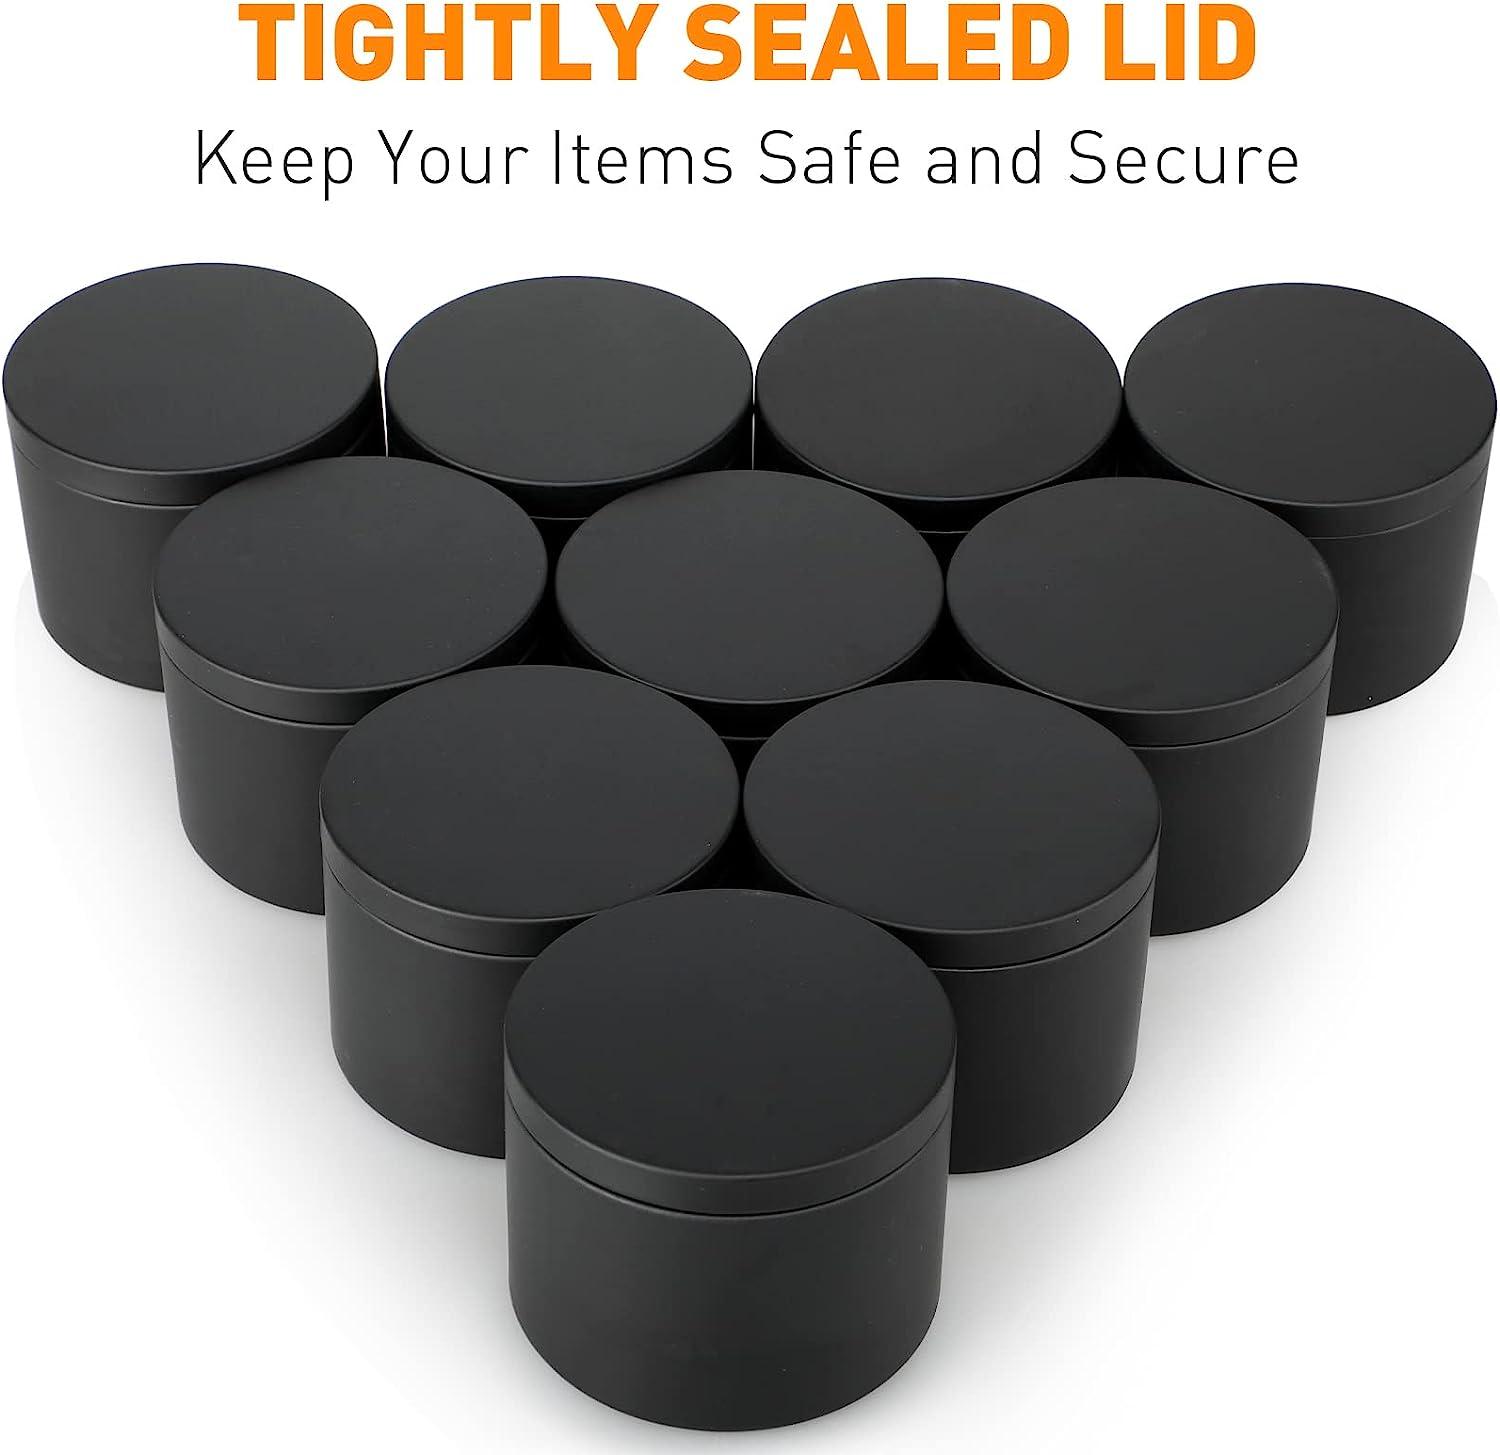 PMCDS2G 24 All-Black 8oz Candle Tins with Lids, Seamless Pot-Bellied Black  Matt Finish, Candle Making Supplies, Empty Candle Jars for Making Candles  Bulk, Candle Containers